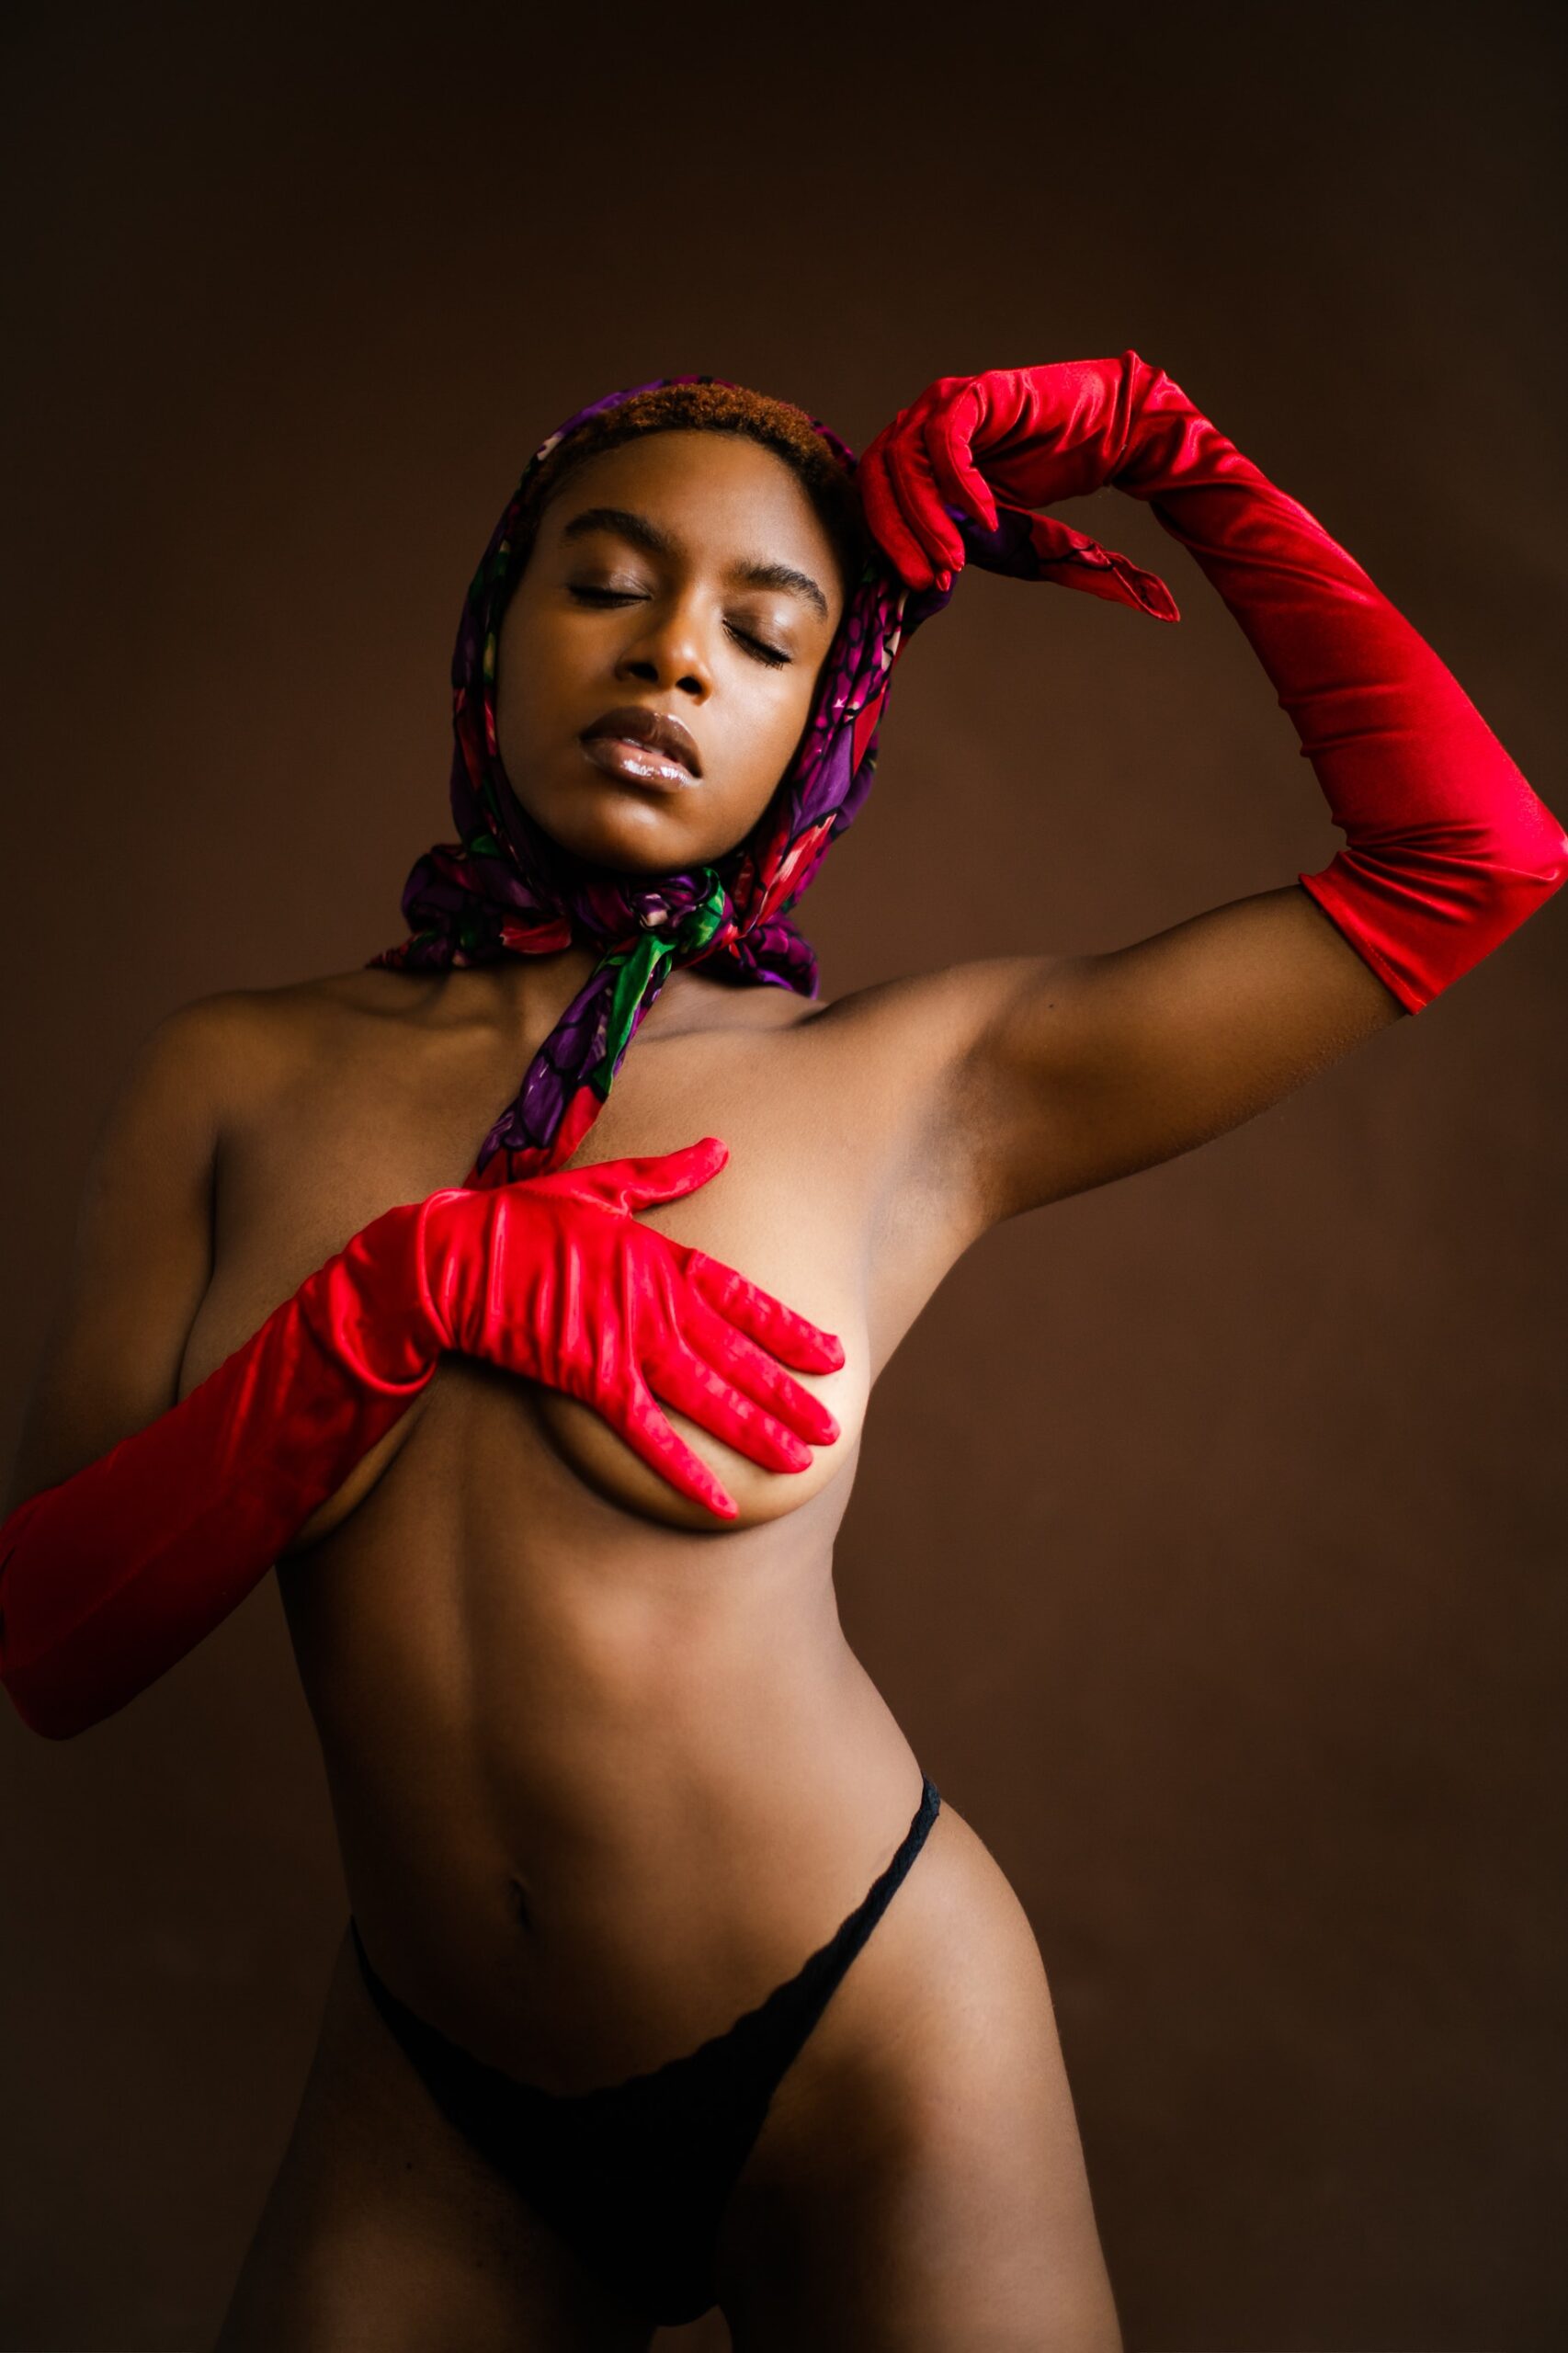 Photo by Arianna Jadé: https://www.pexels.com/photo/woman-in-black-bikini-top-and-red-gloves-4006506/